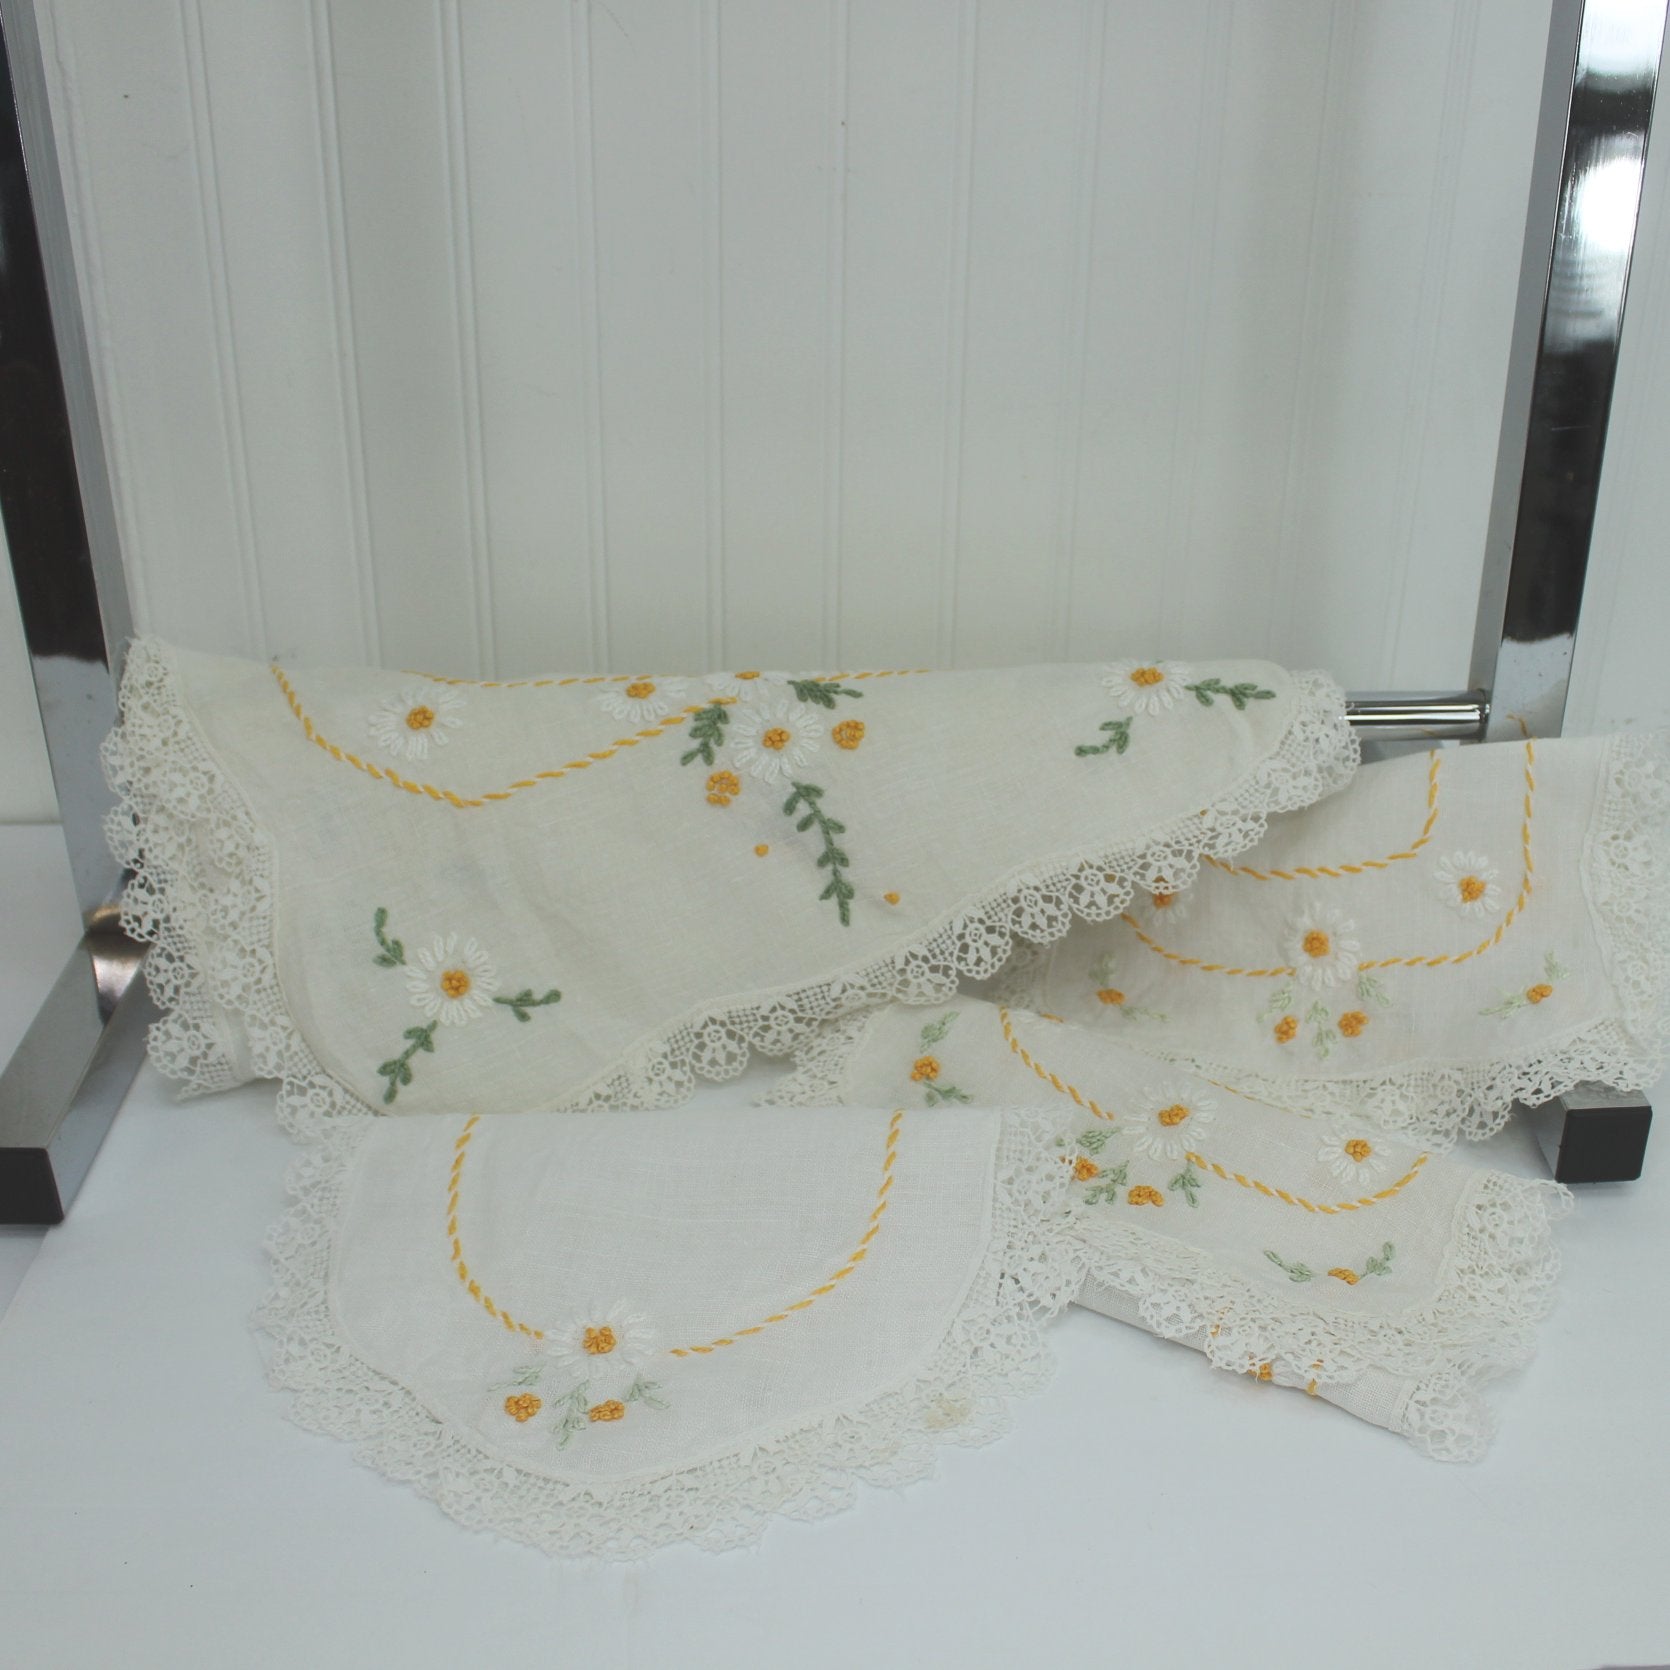 Collection 4 Embroidered Fine Linen Table Pieces White with Daisies Lace Elegant Vintage 3 different sizes matching